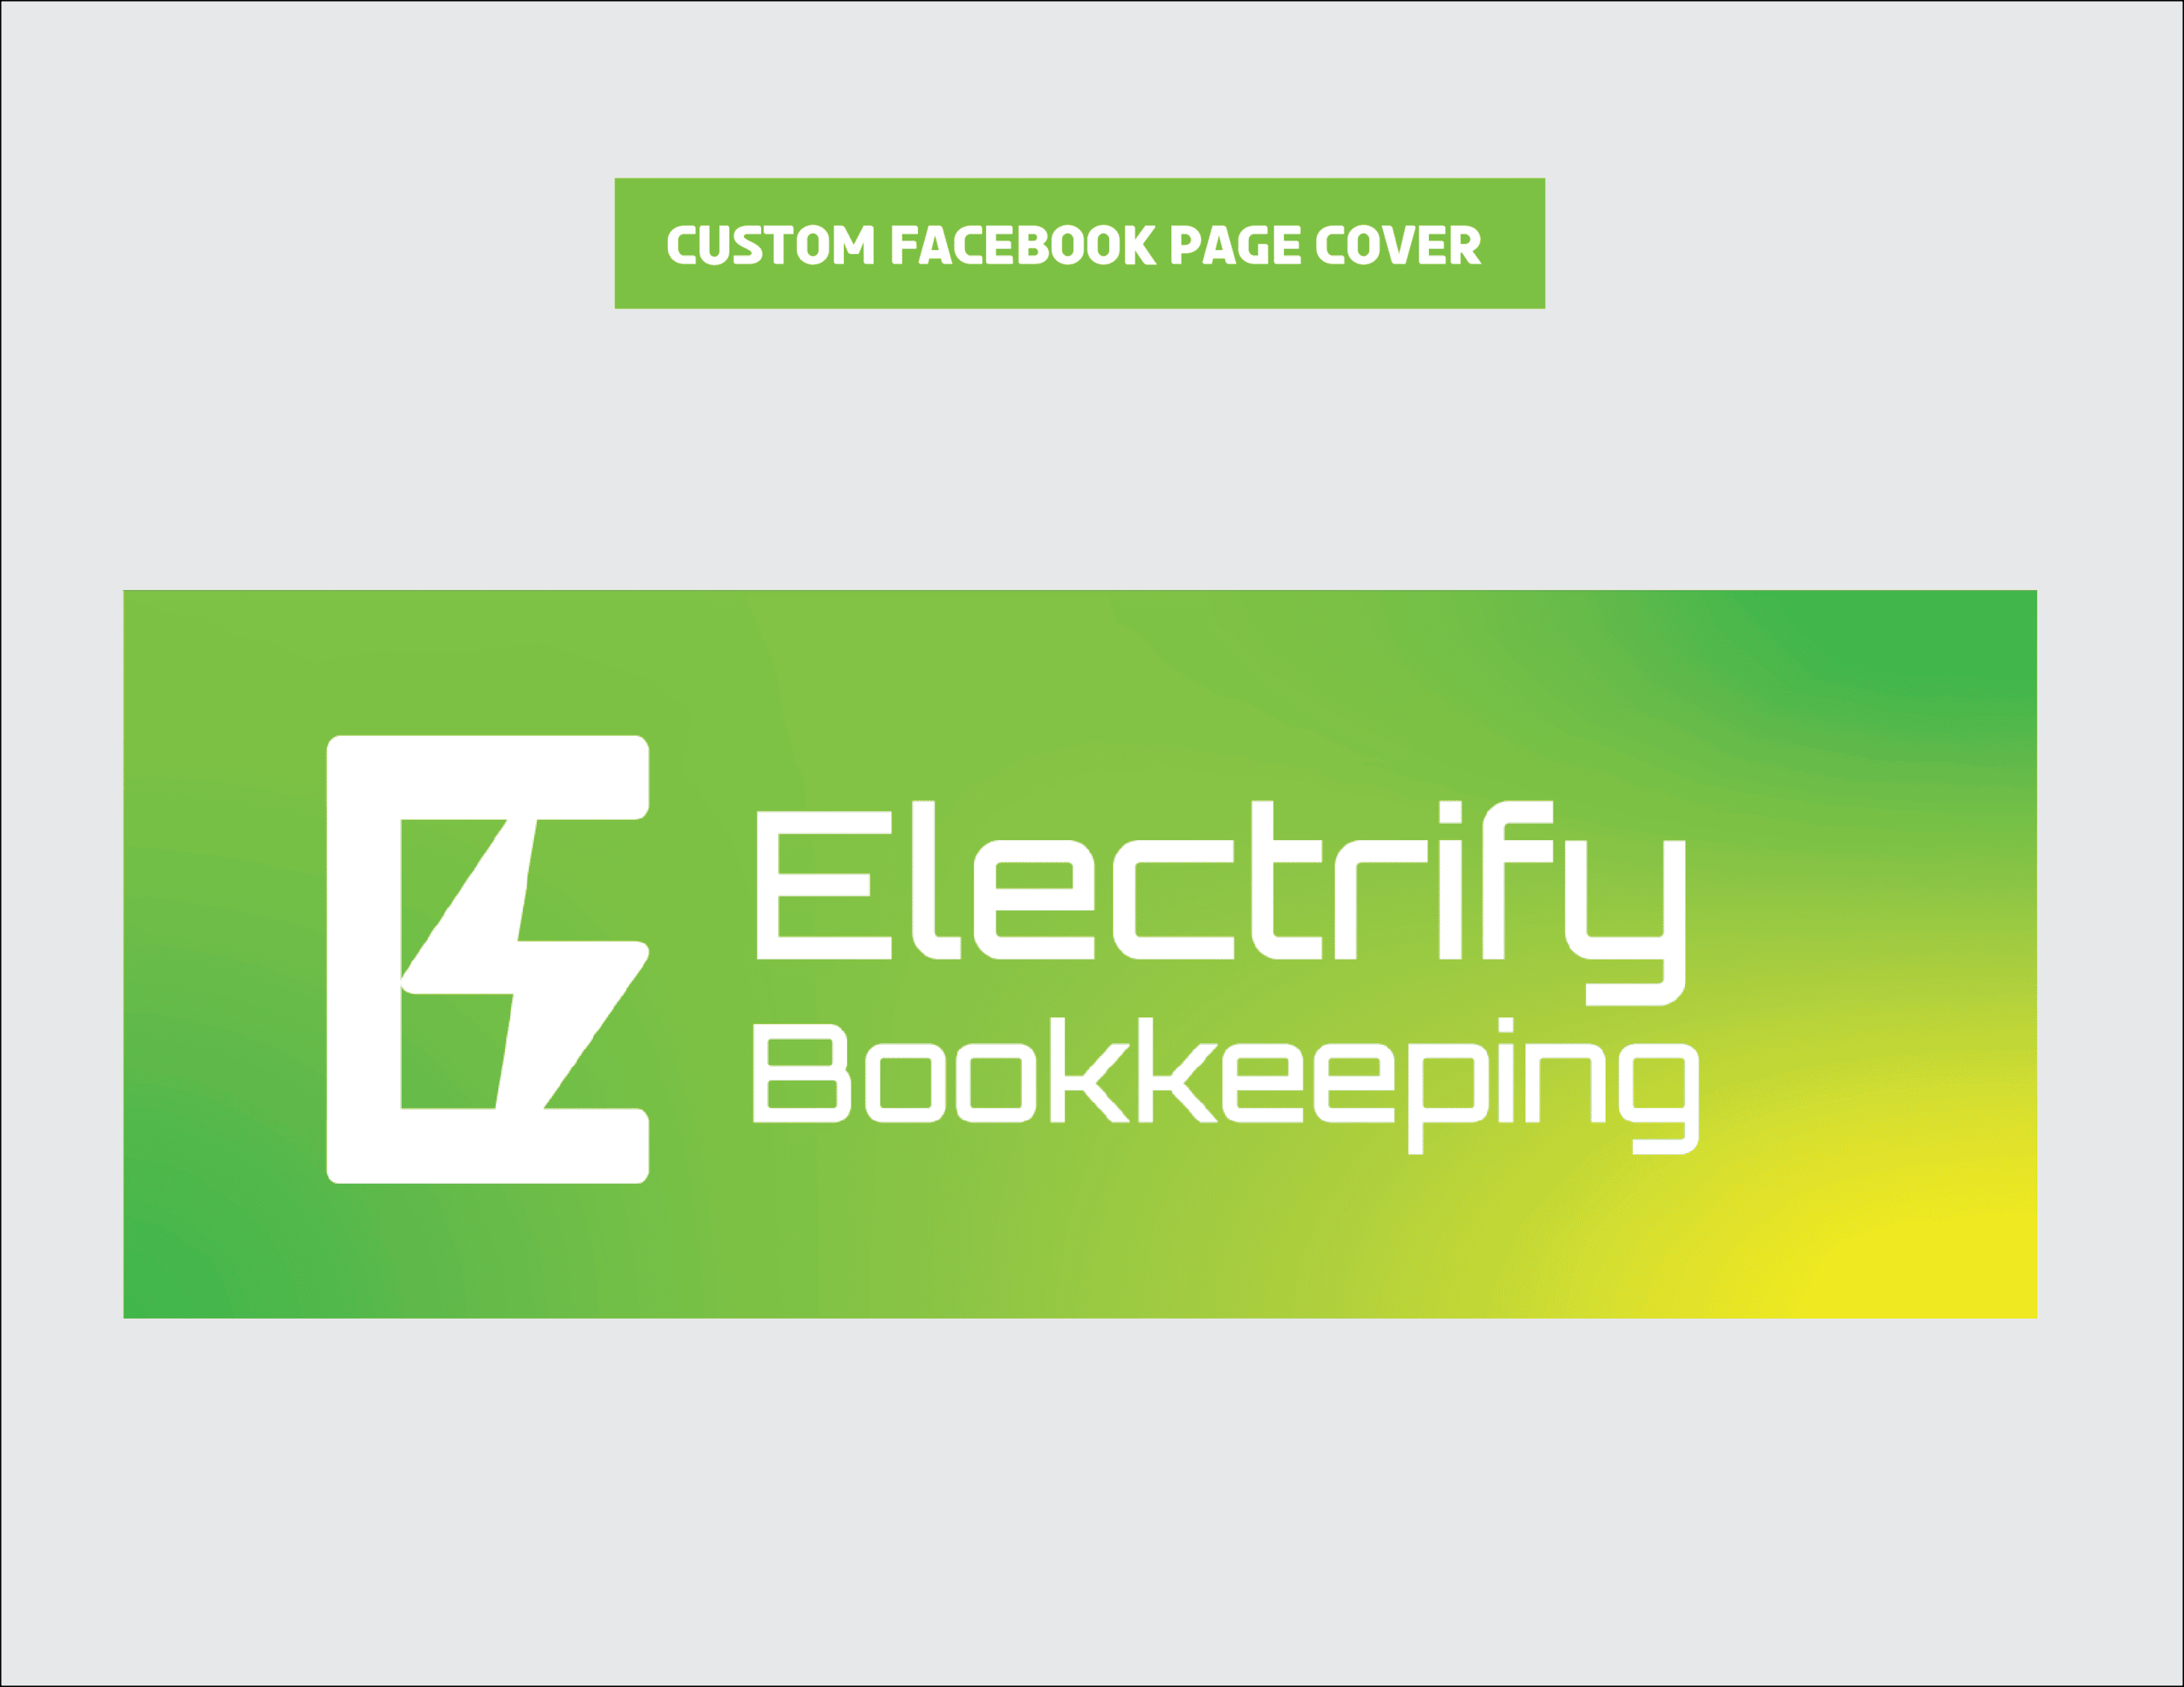 06_ElectrifyBookkeeping_Custom Facebook Page Cover